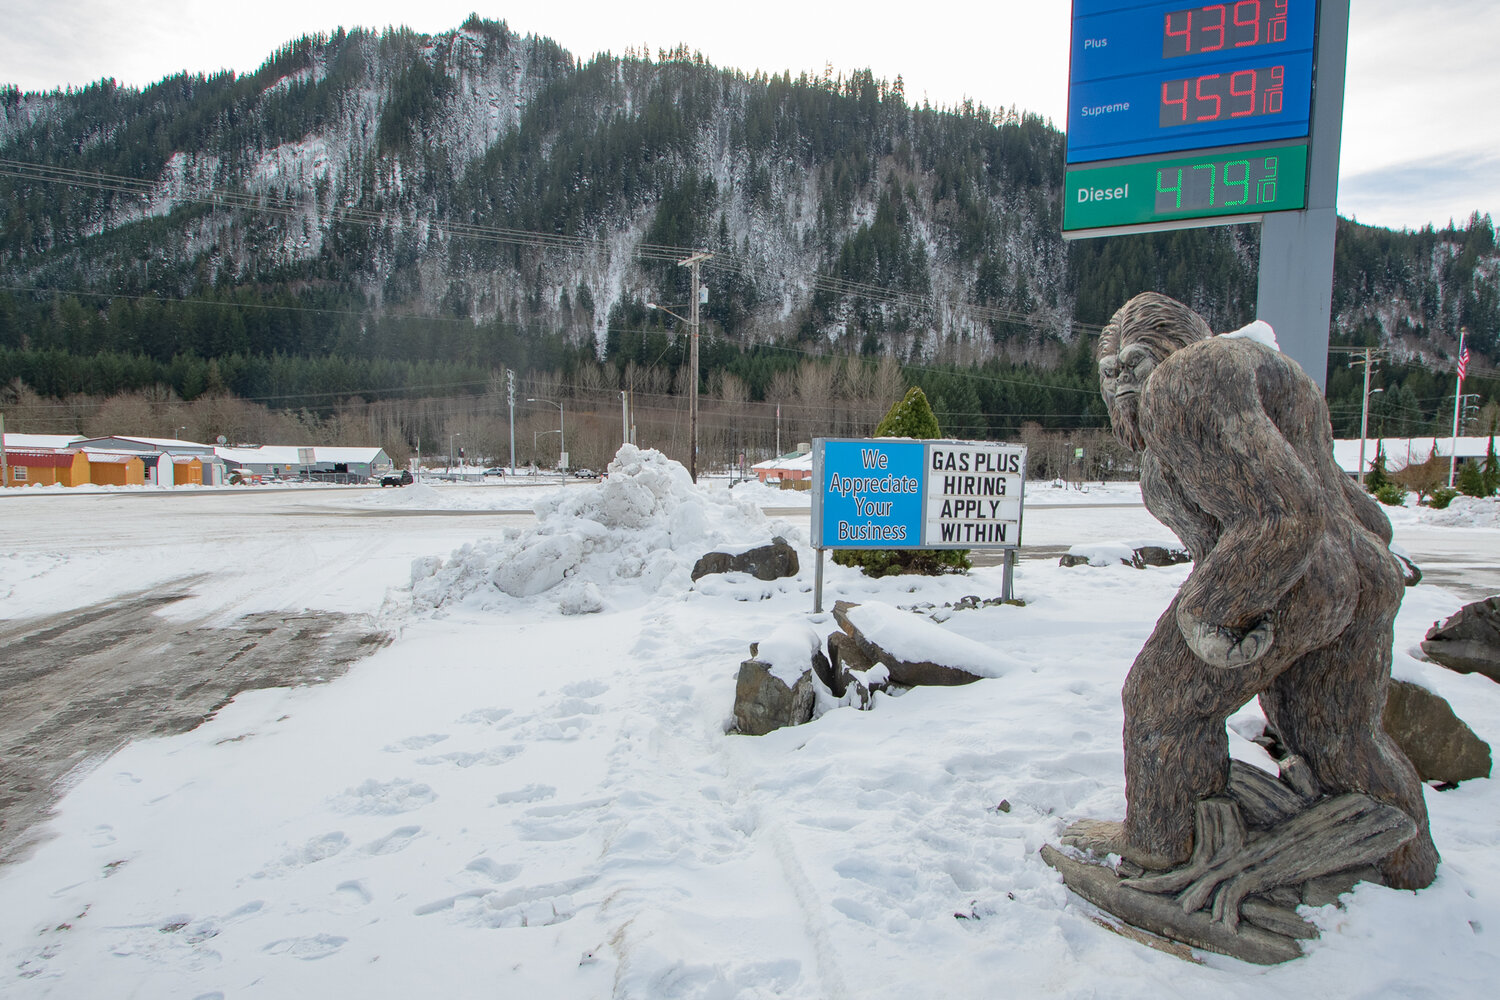 This bigfoot statue outside of the Gas Plus convenience store in Morton is seen on Sunday, Jan. 14, keeping a watchful eye on traffic in the snow.